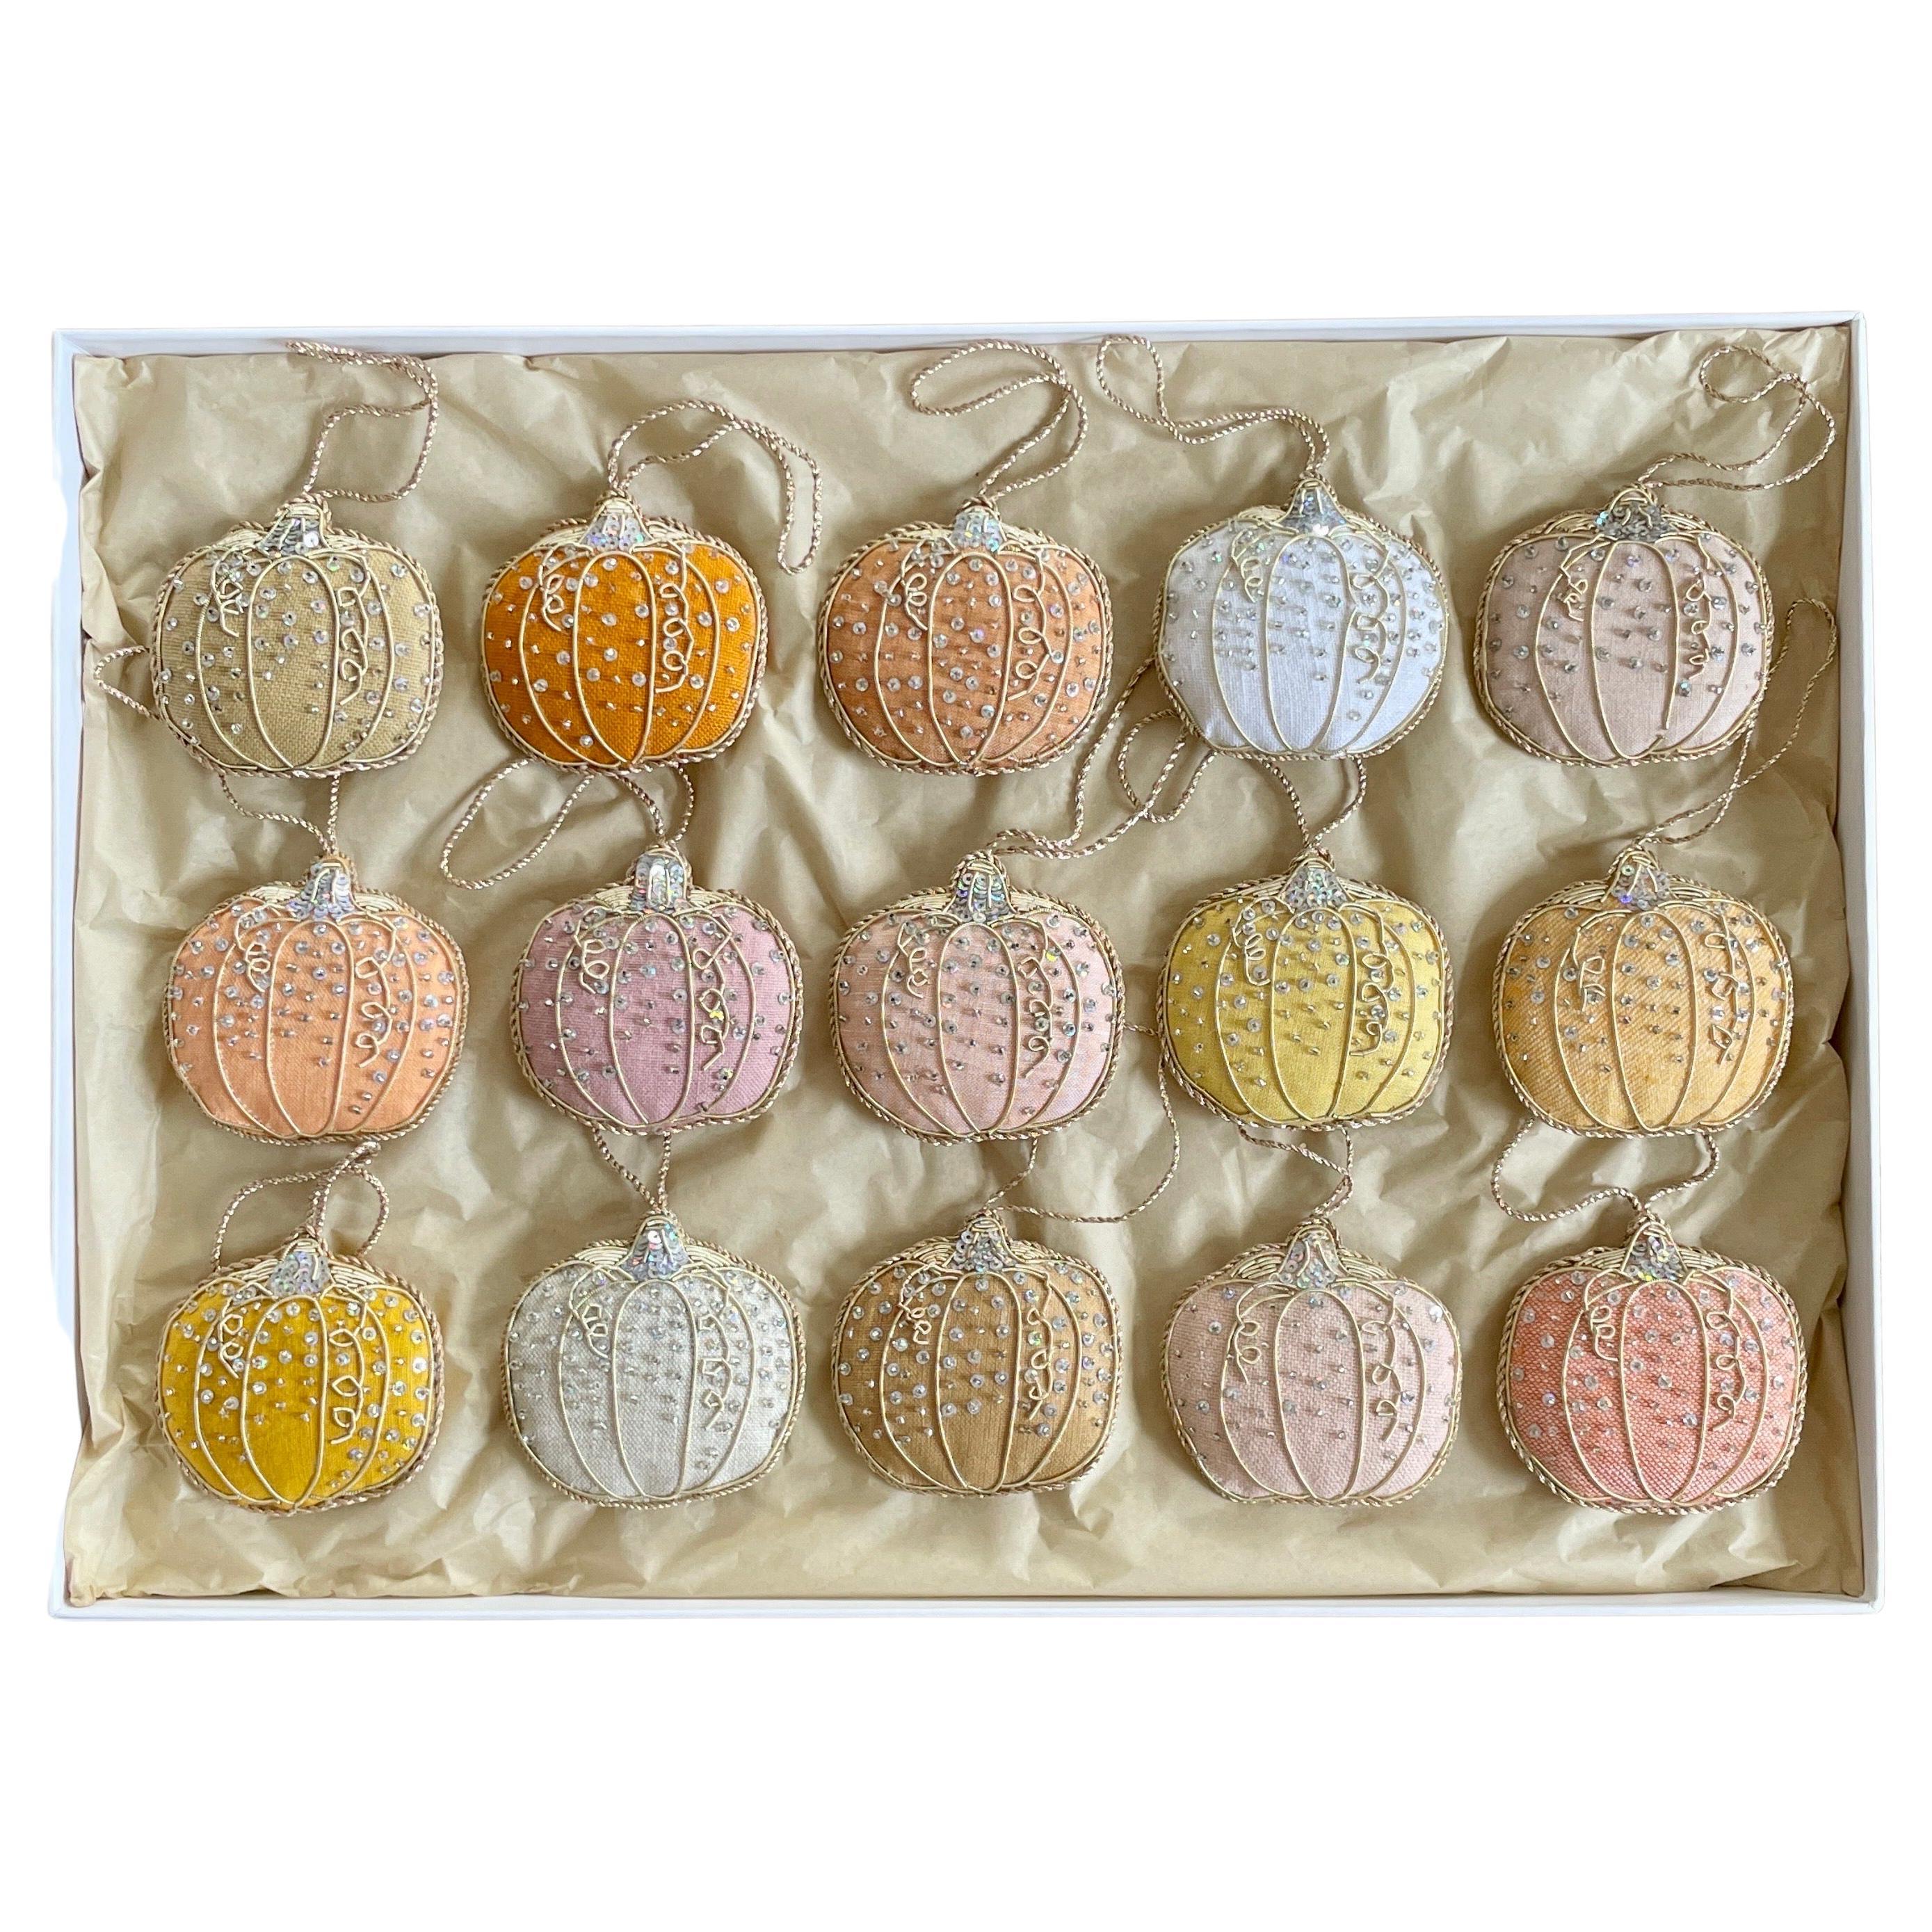 Set of 15 limited Edition Artisan Irish Linen pumpkin onaments by Katie Larmour

This is a luxury box set of artisan made decorative ornaments created with authentic Irish Linen, exclusive to 1stdibs. They are special because they are limited